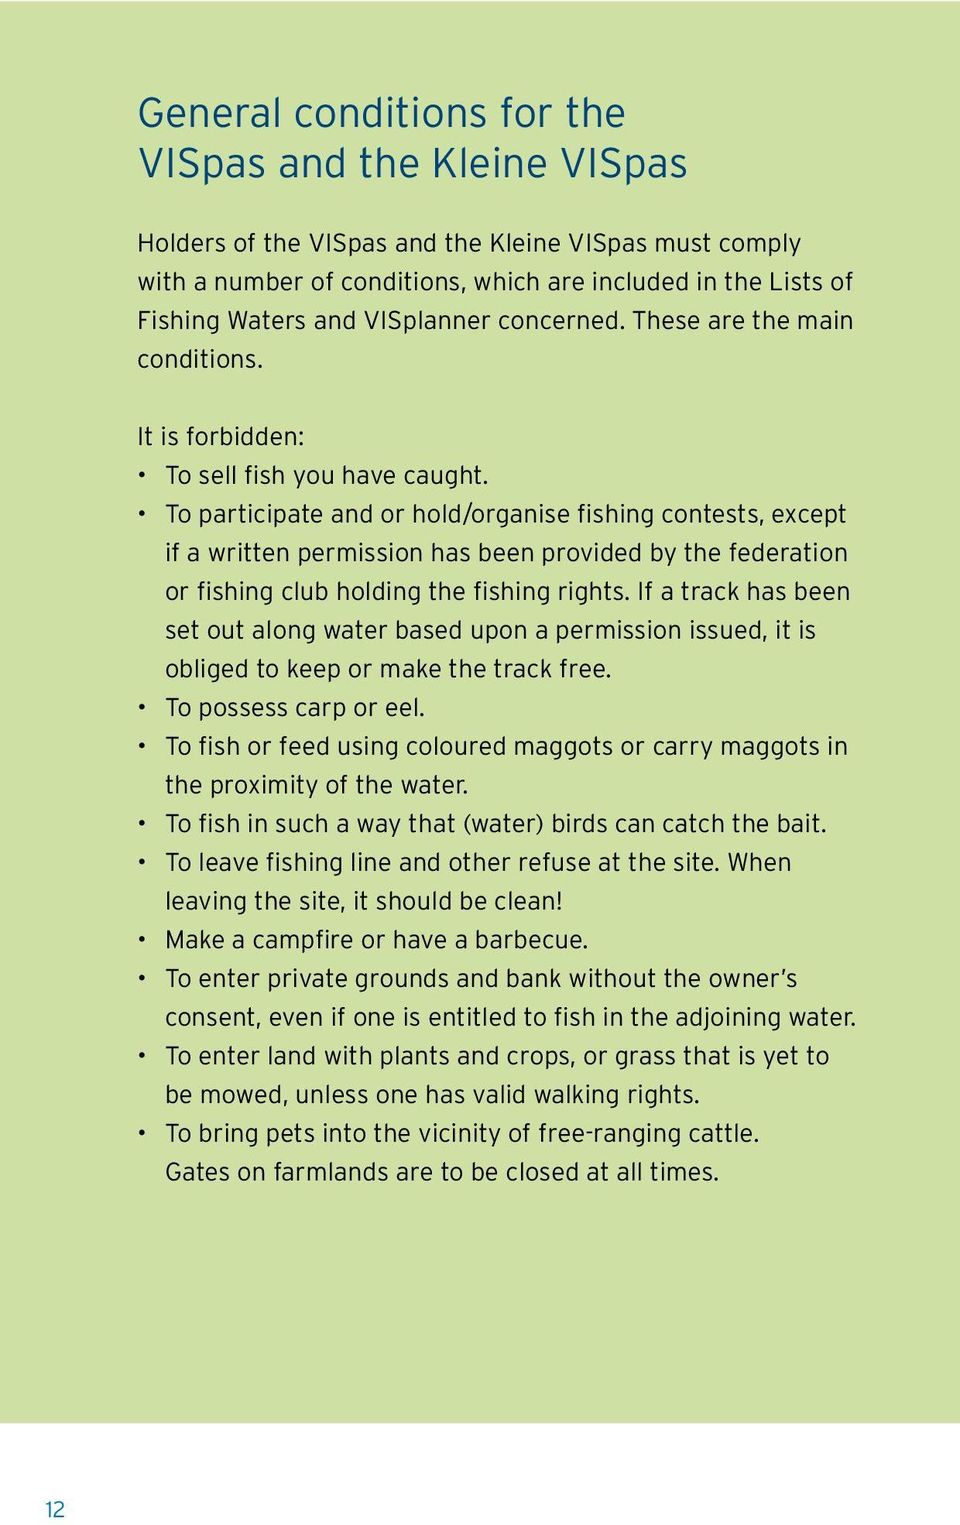 To participate and or hold/organise fishing contests, except if a written permission has been provided by the federation or fishing club holding the fishing rights.